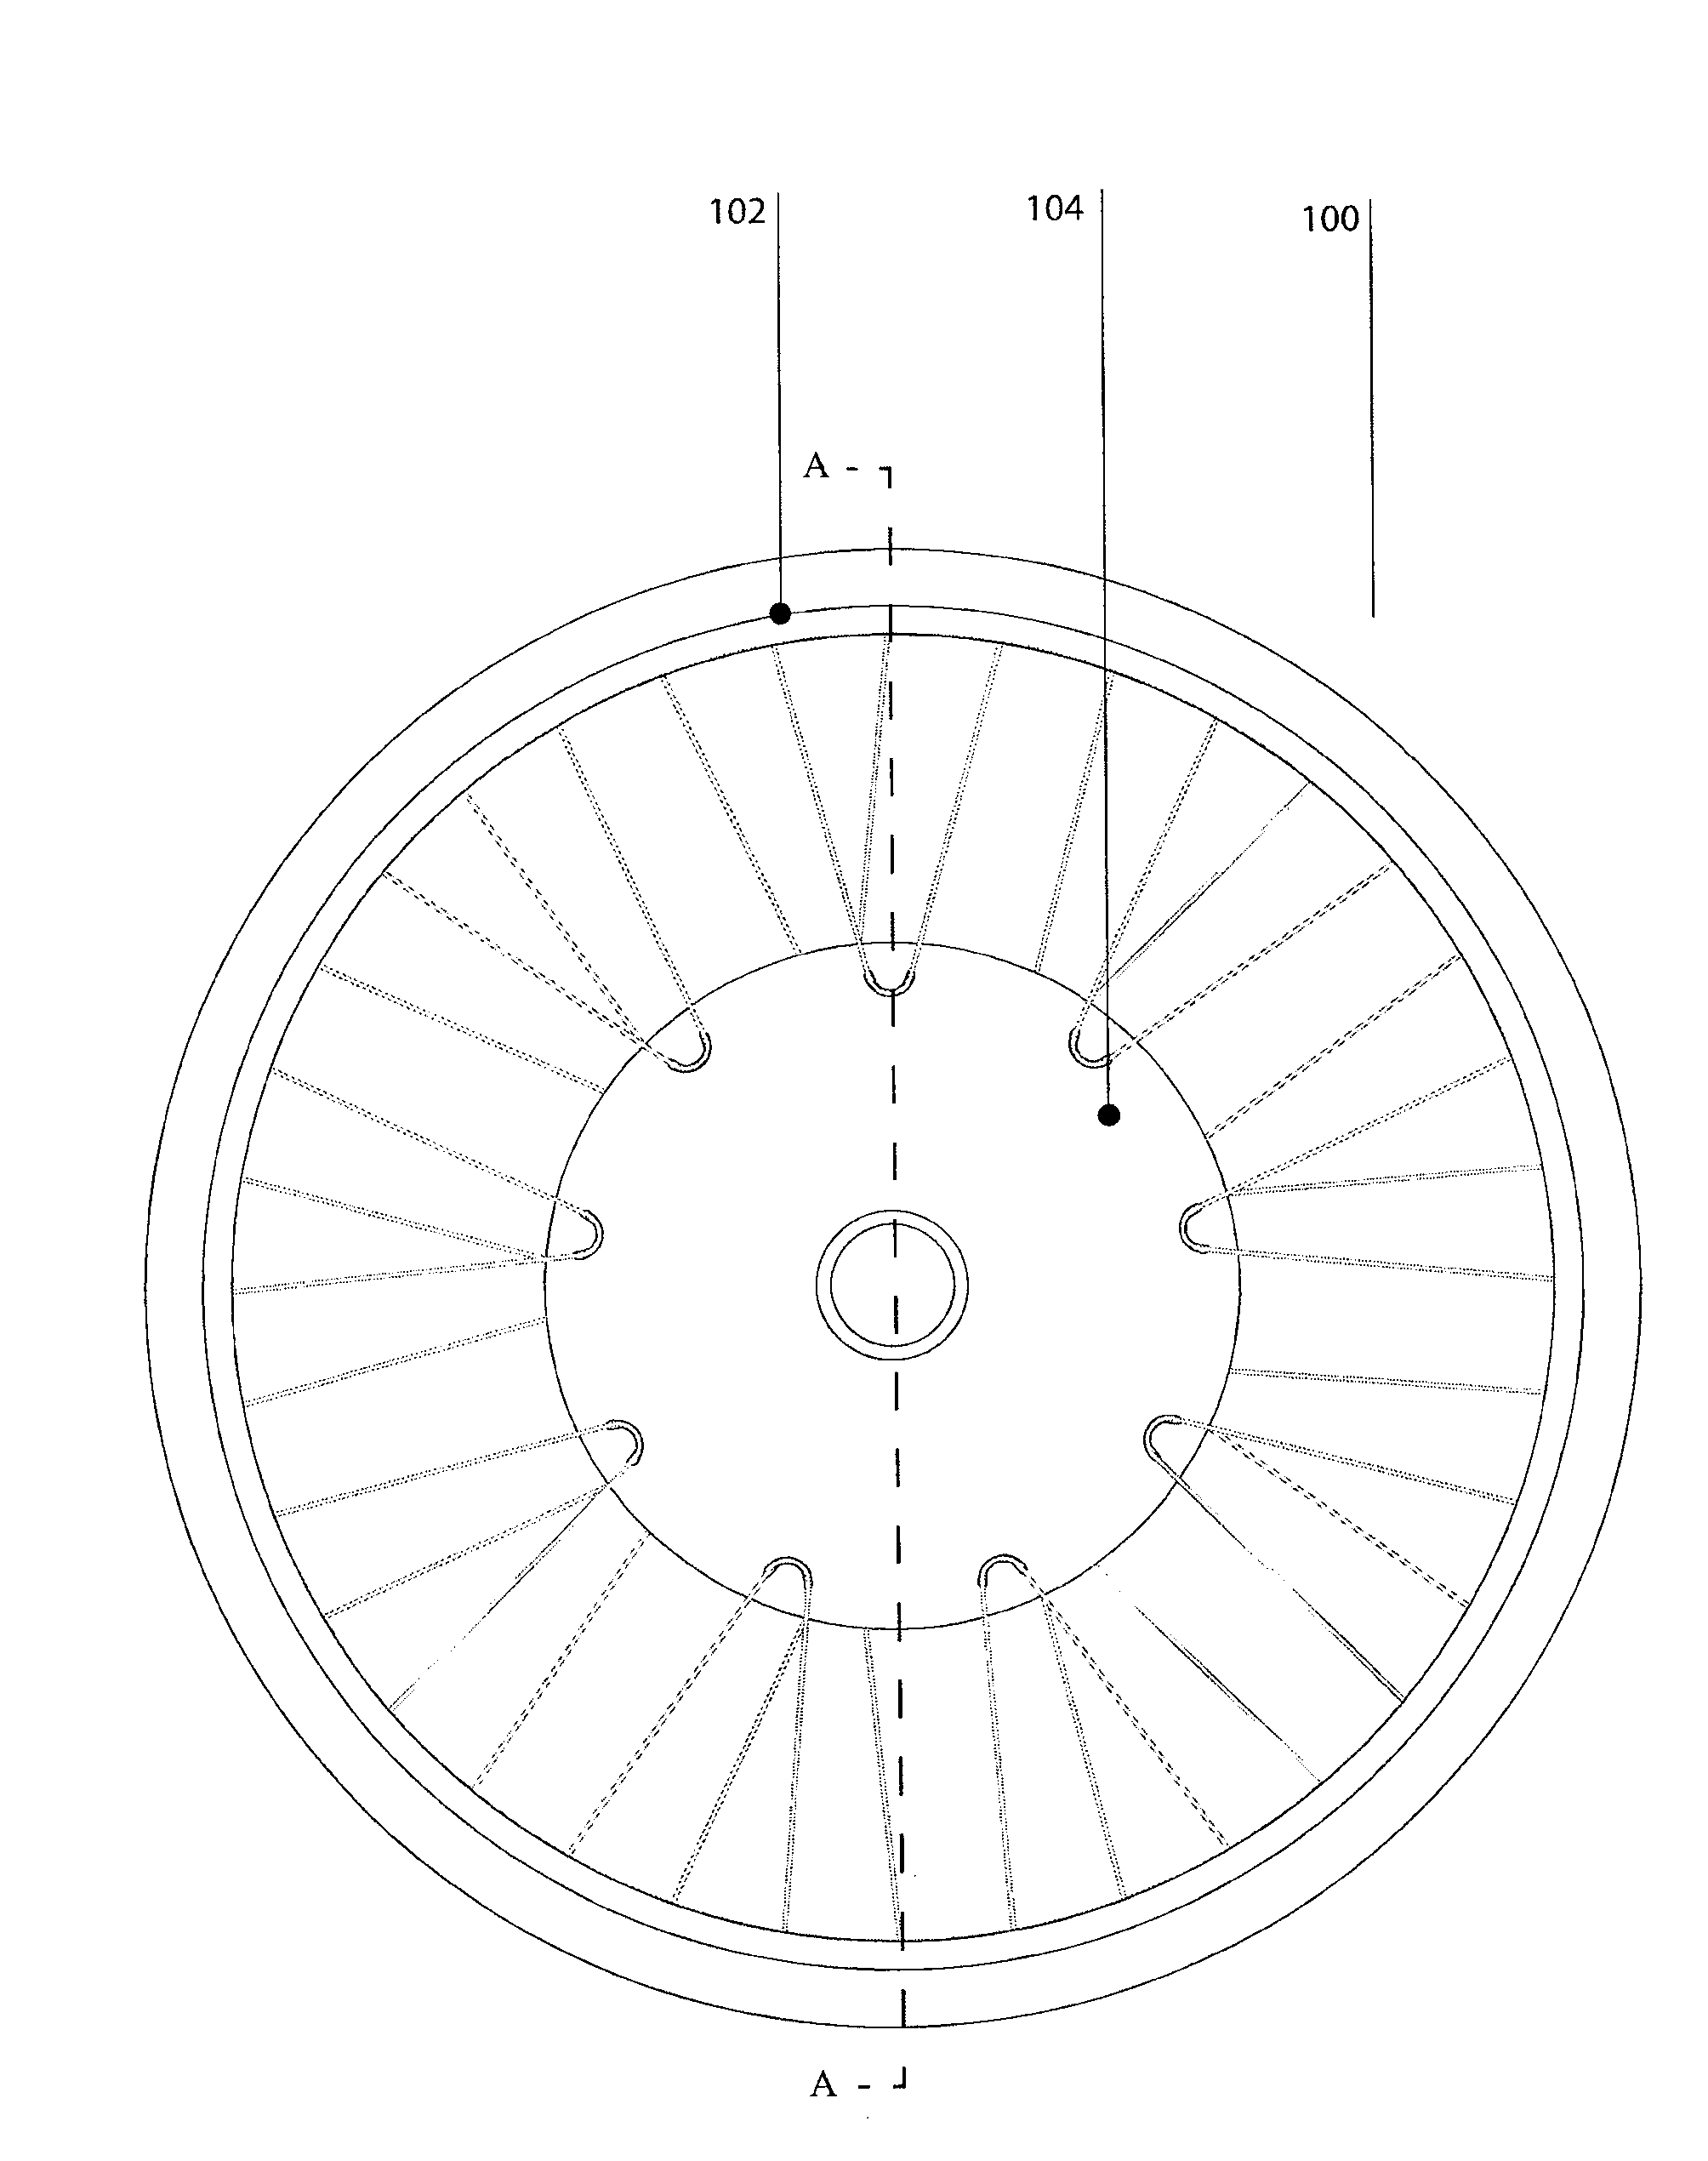 Hybrid sensor-enabled electric wheel and associated systems, multi-hub wheel spoking systems, and methods of manufacturing and installing wheel spokes